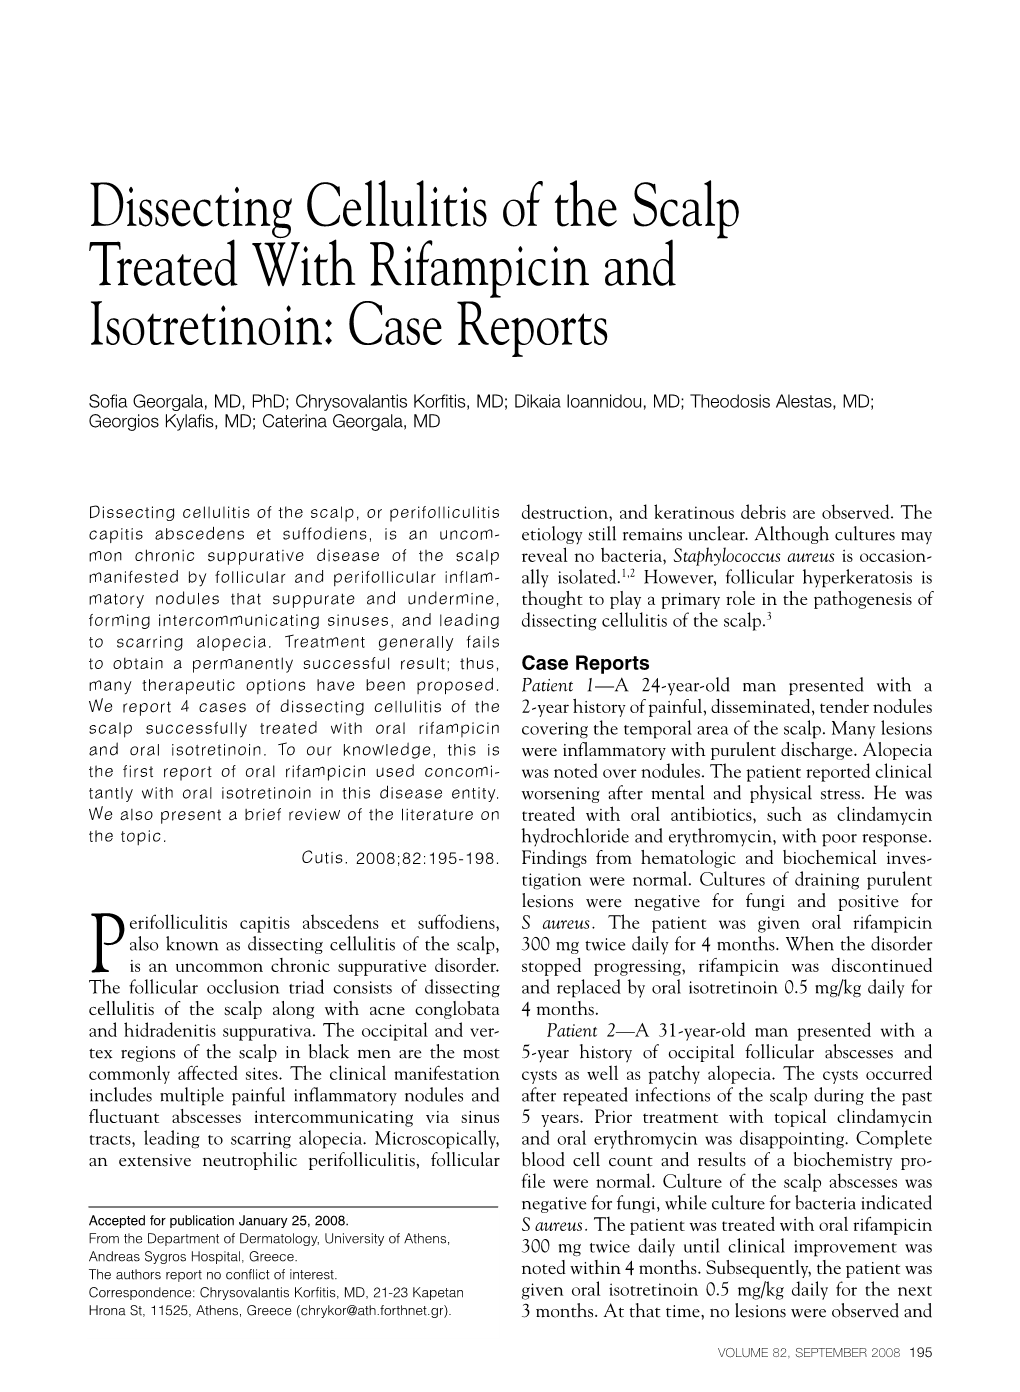 Dissecting Cellulitis Of The Scalp Treated With Rifampicin And